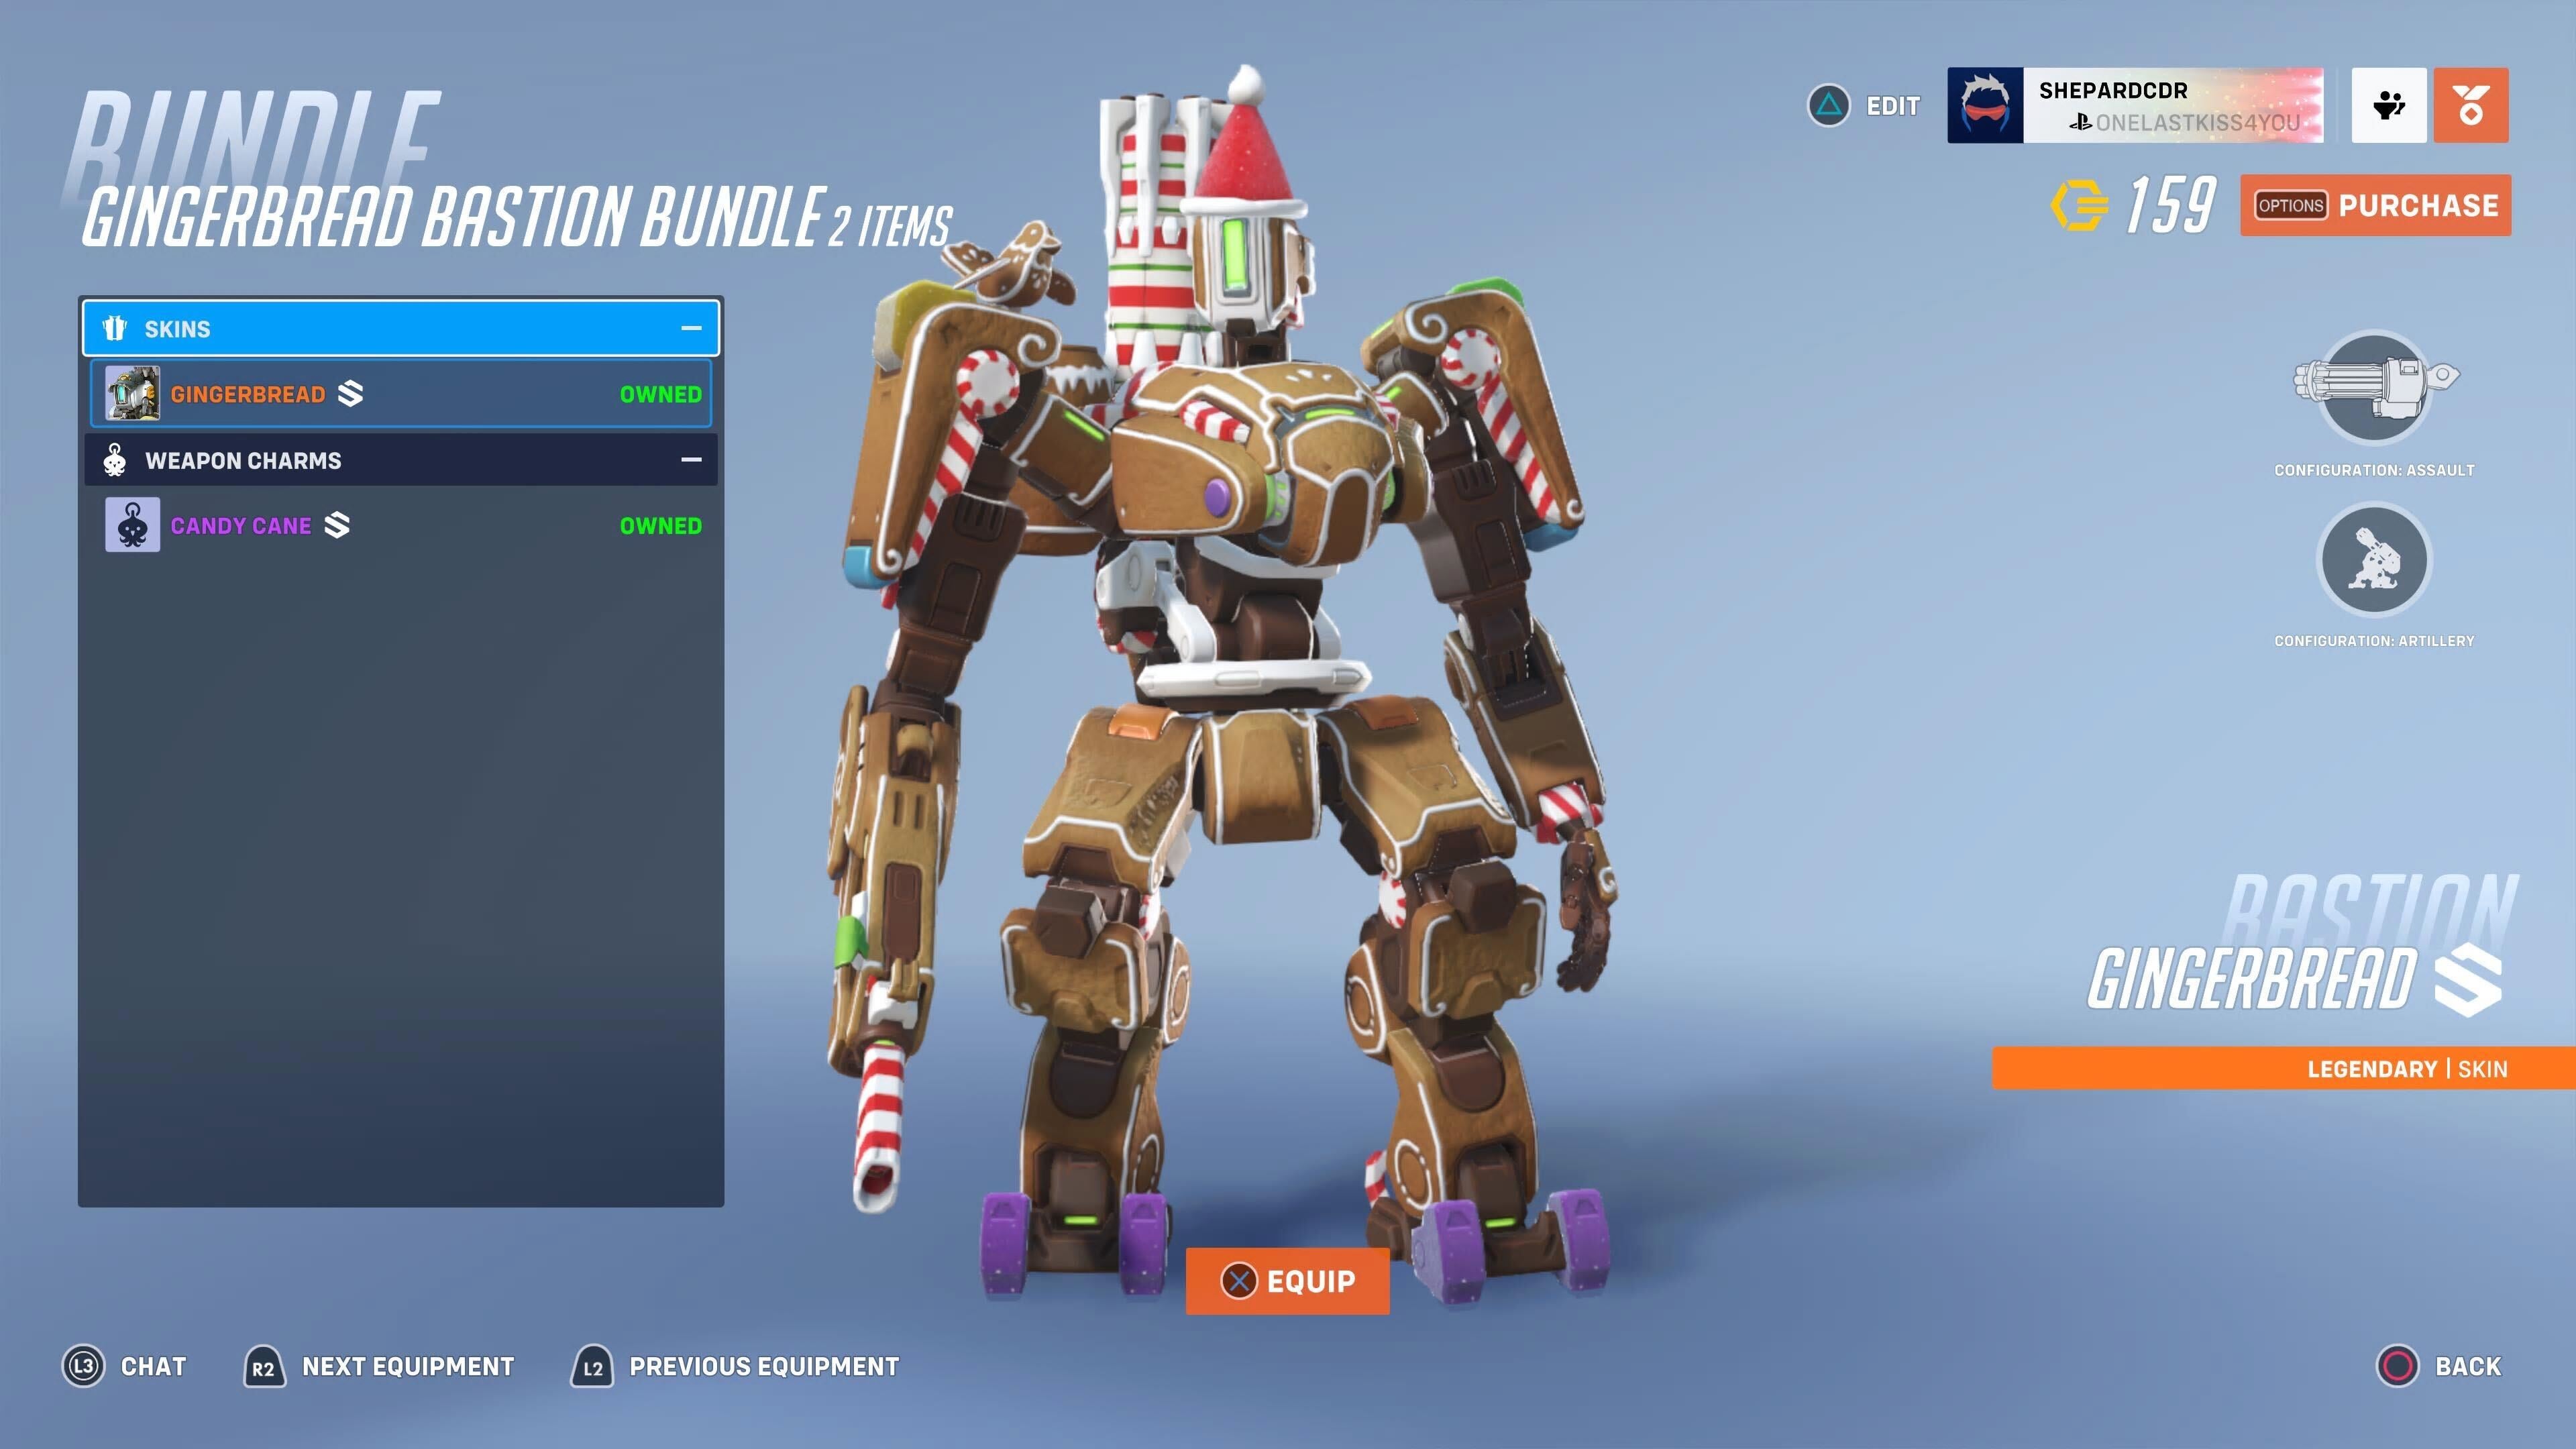 Bastion and his gingerbread bird are cute, but at what cost? (Screenshot: Blizzard Entertainment/Kotaku)